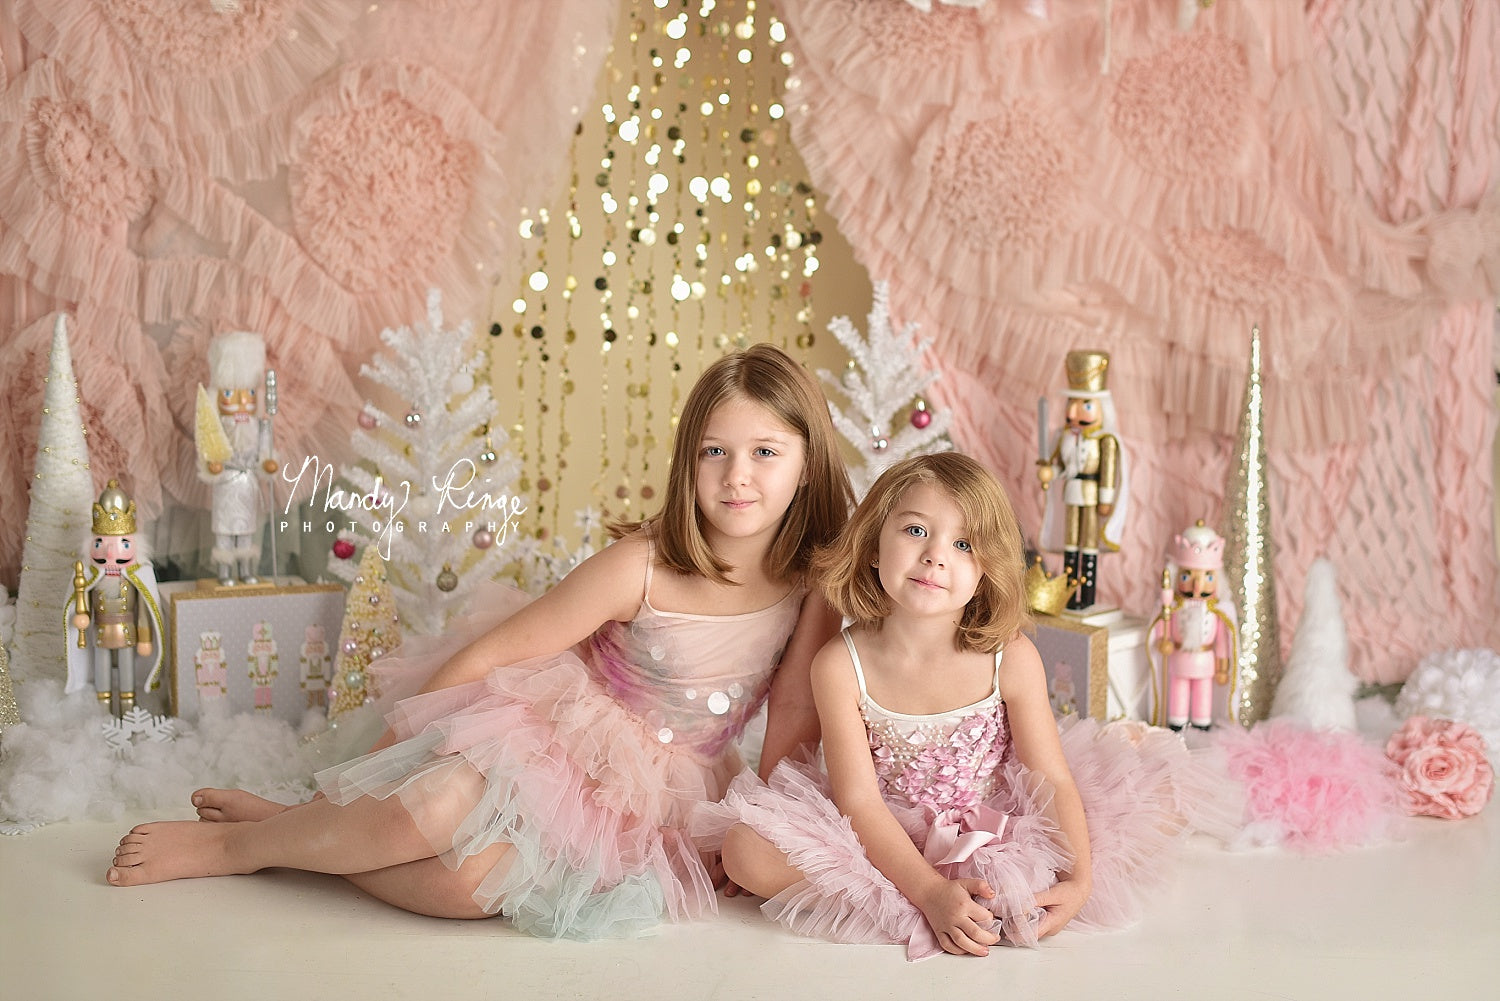 Kate Pink and Gold Nutcrackers Christmas Backdrop for Photography Designed By Mandy Ringe Photography